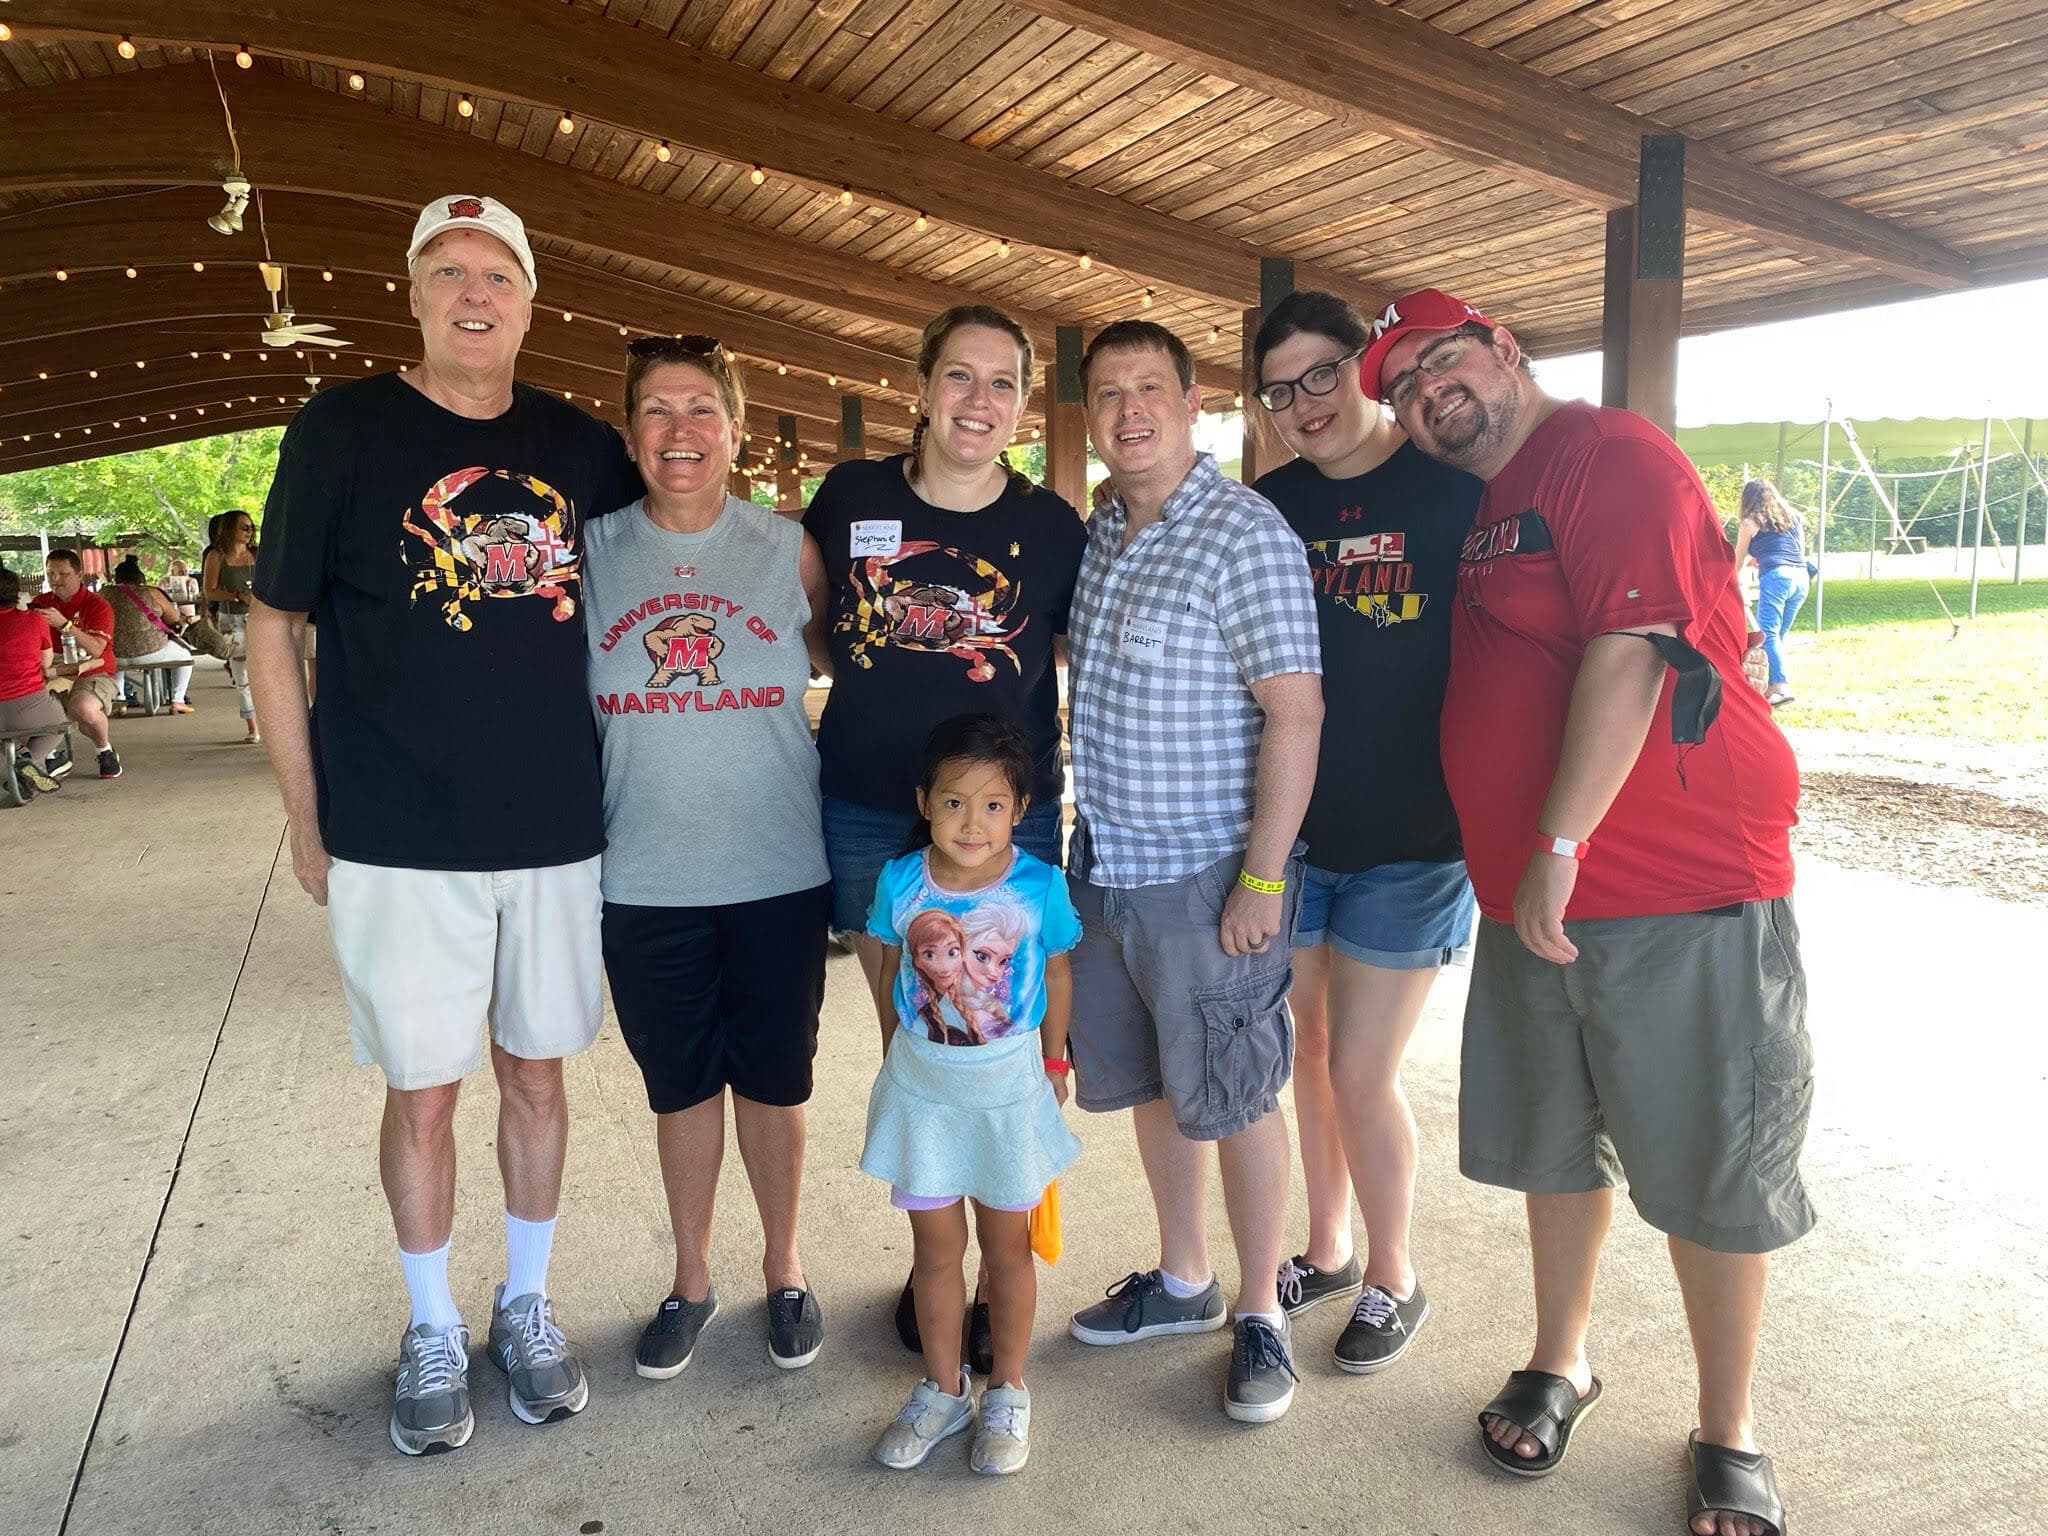 (Left to right) Mark Groff, Julie Groff '83, Stephanie Groff '13, Barrett Claunch (Stephanie's husband), Hayley Groff '16, Steve Bernard (Hayley's partner) and family friend Geneva Chang (front) at a 2021 MoCo Terps crab feast